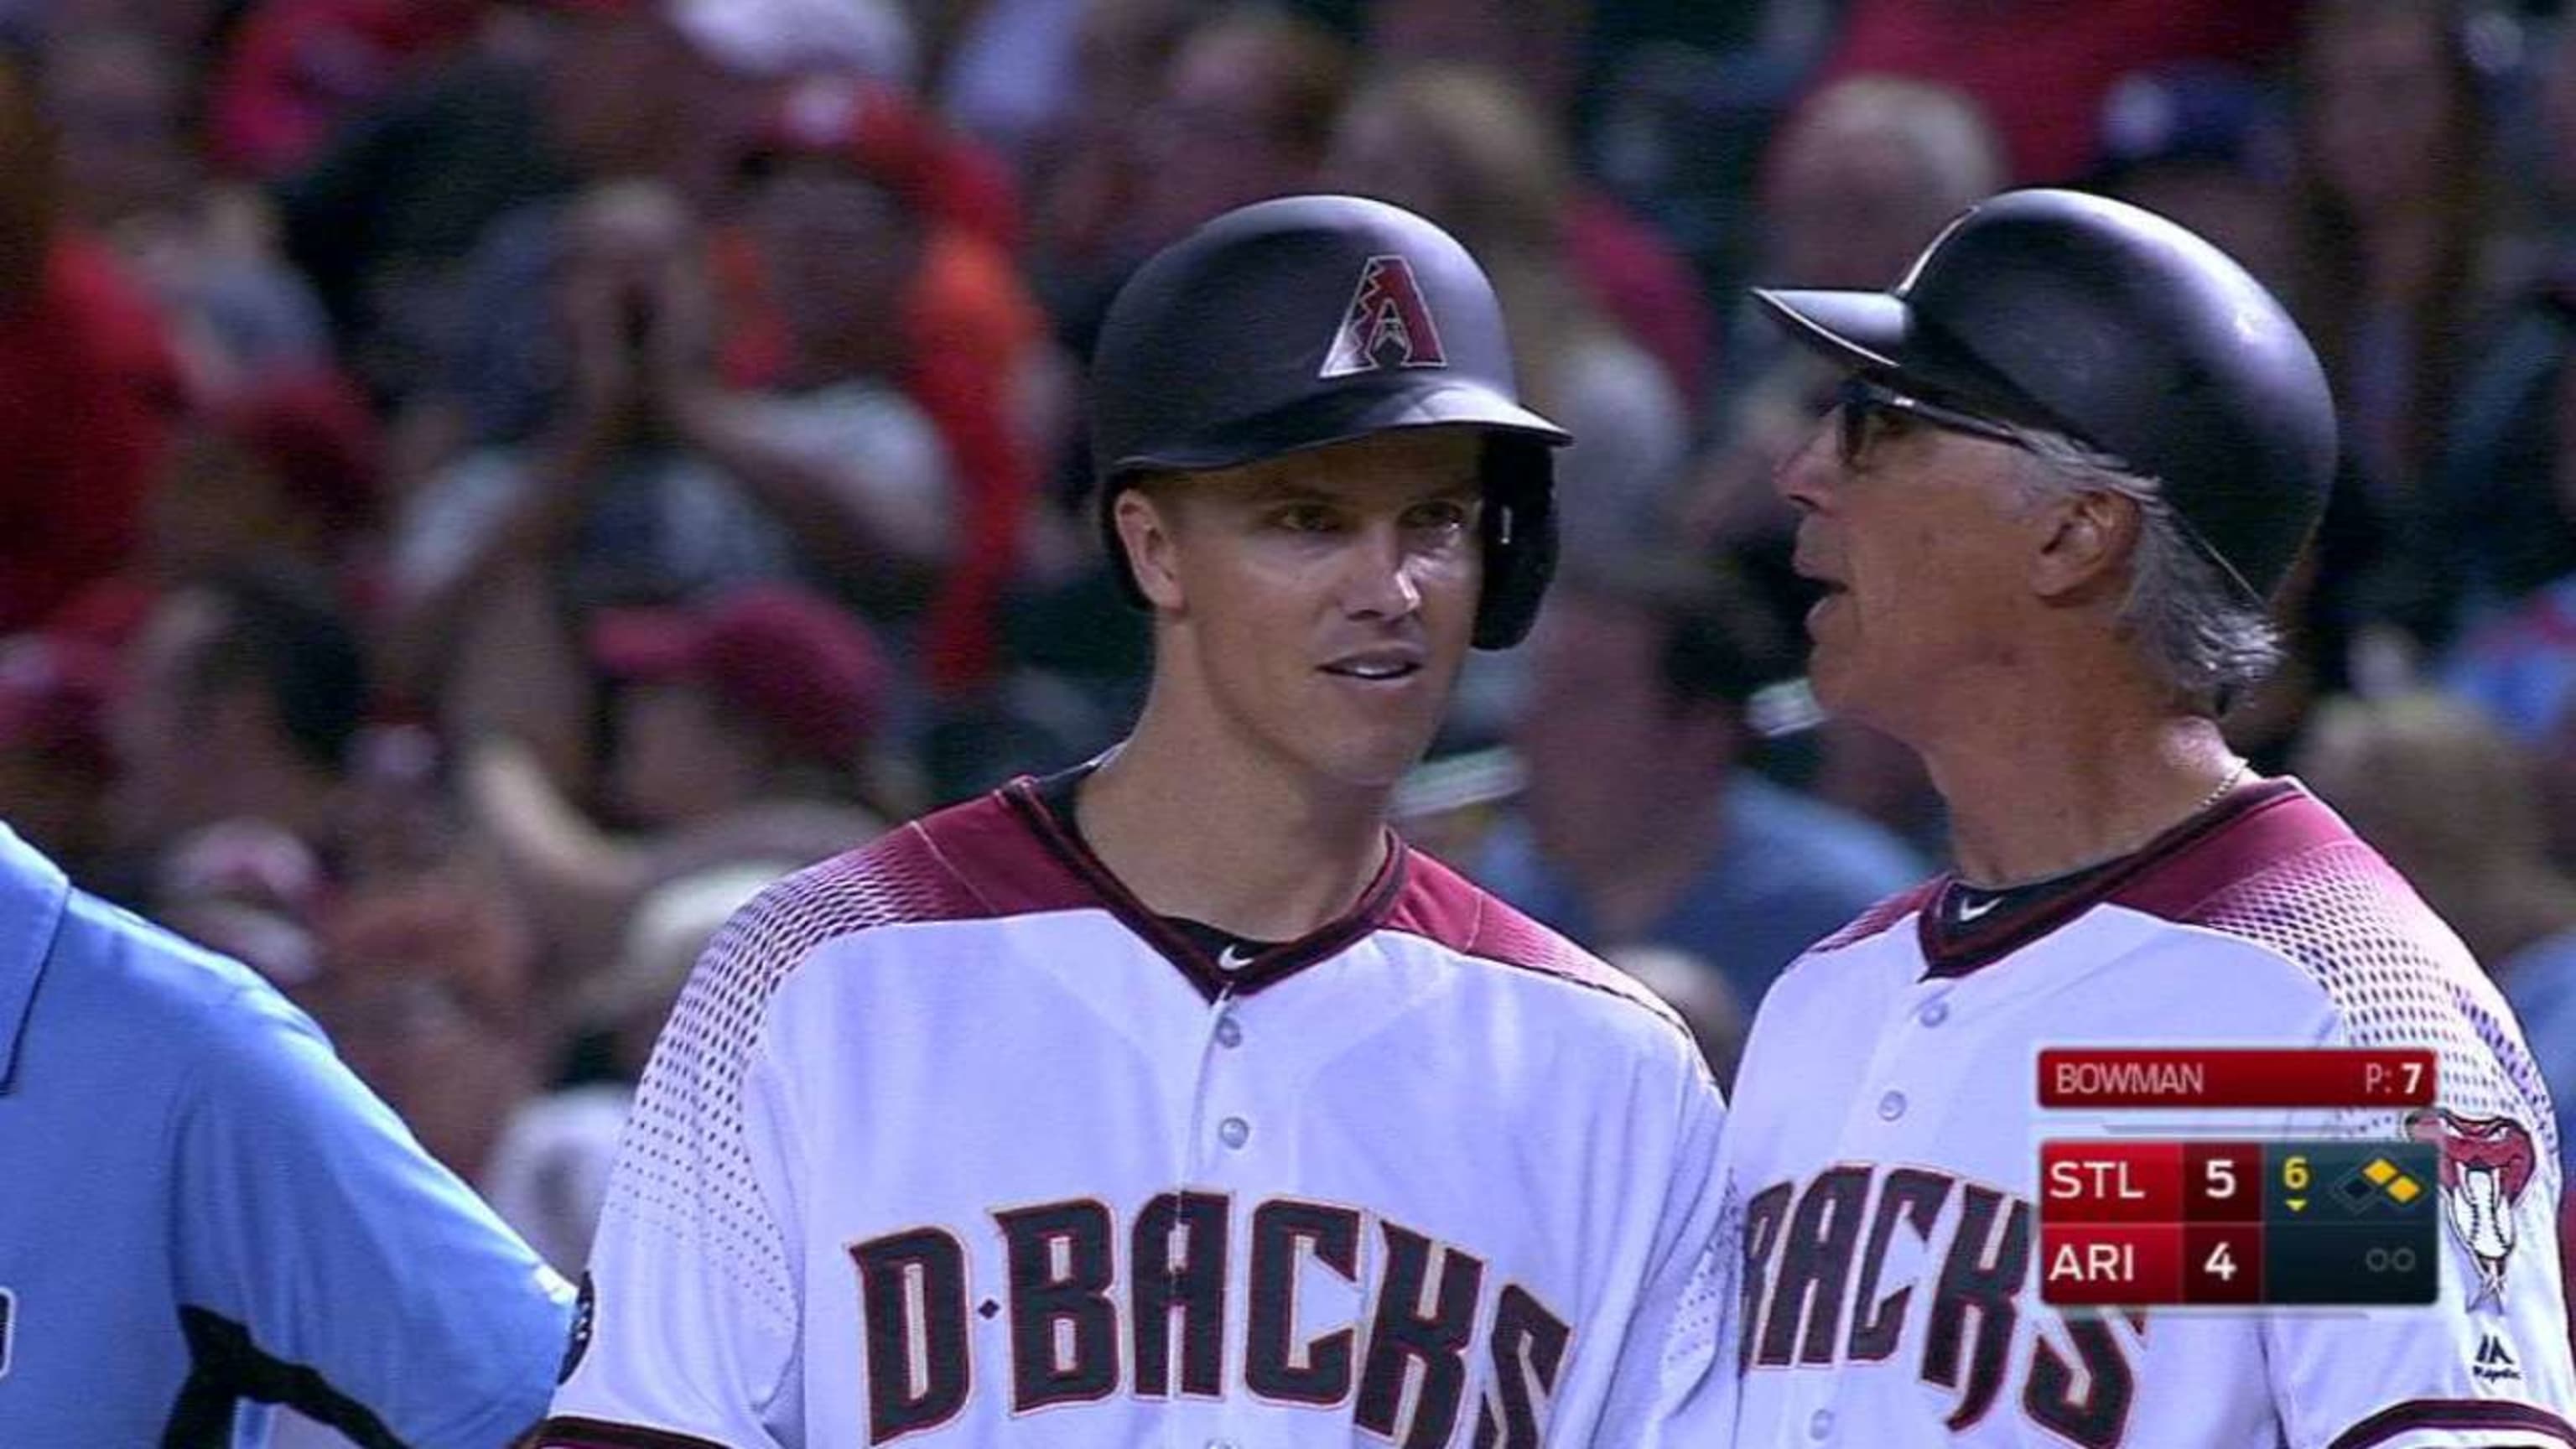 The best part of the D-backs' win was Zack Greinke 'driving the